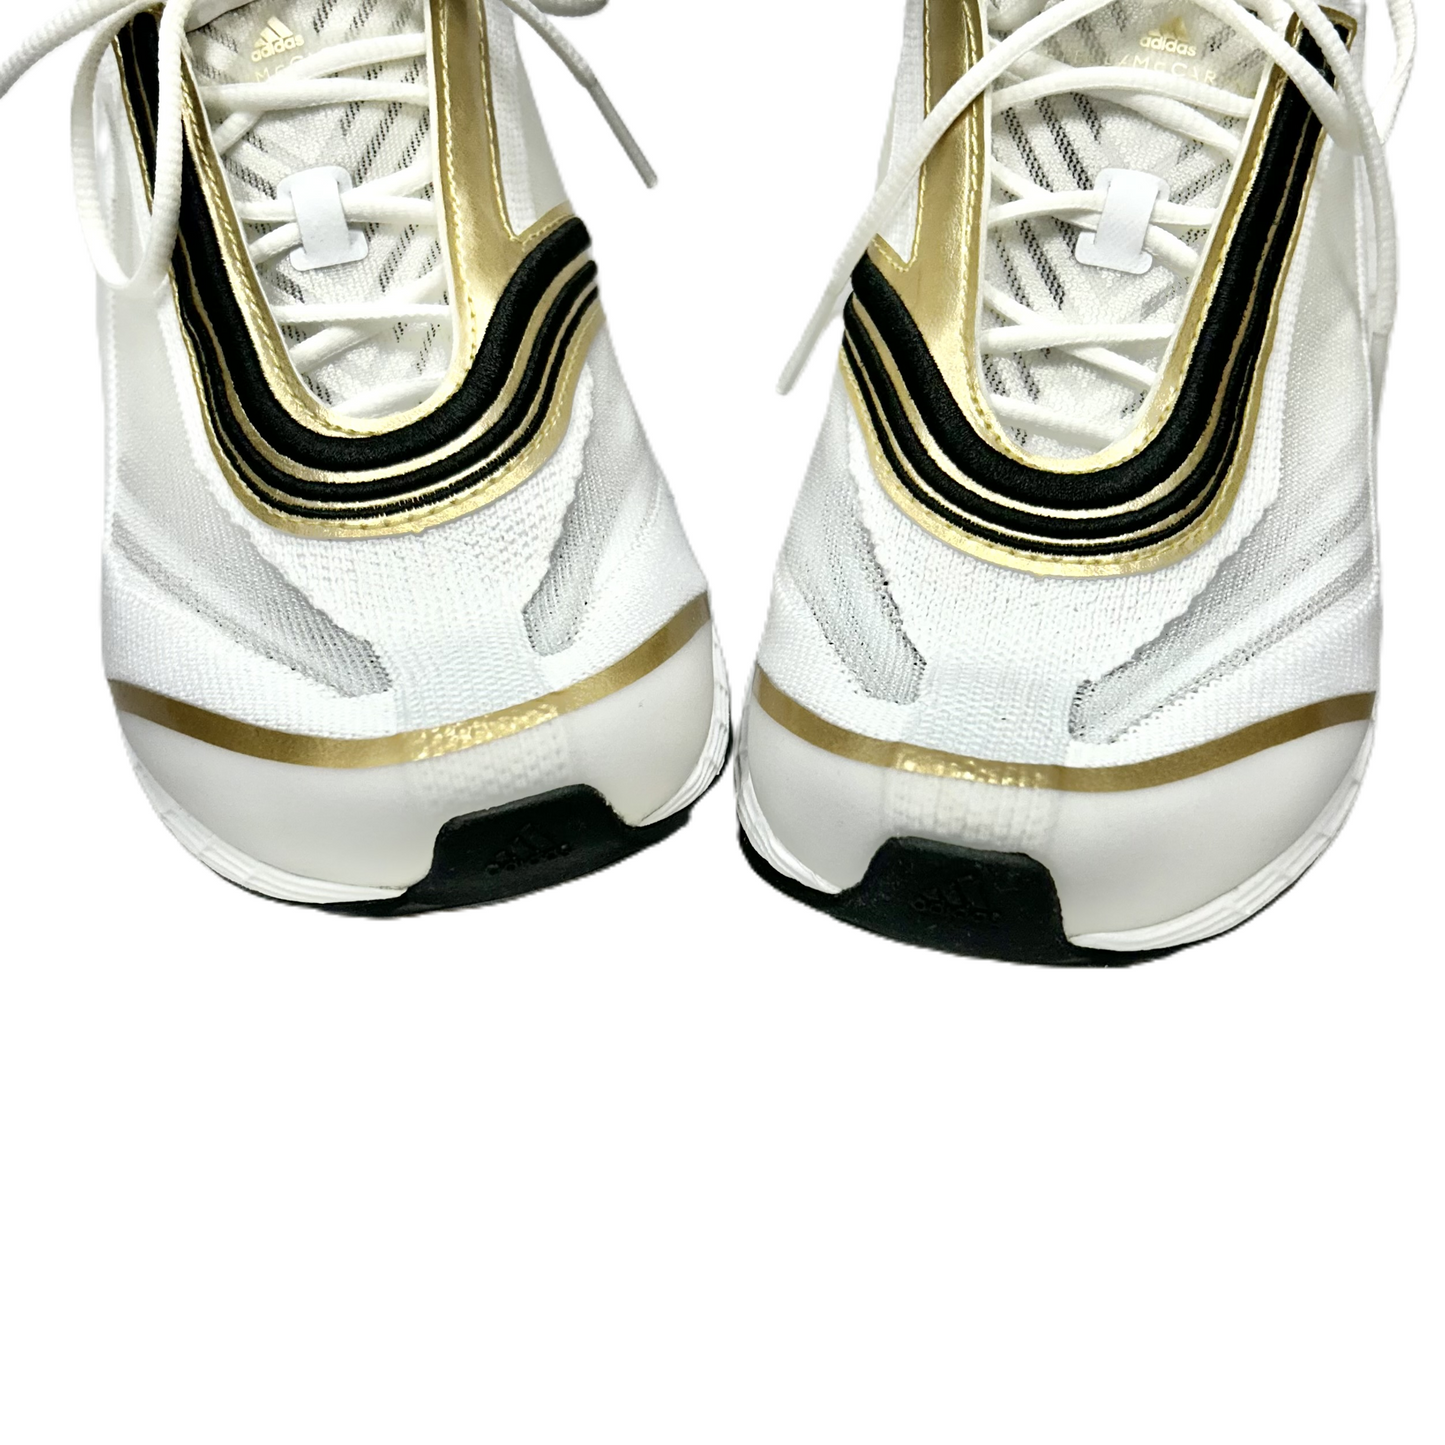 Gold & White Shoes Designer By Adidas, Size: 6